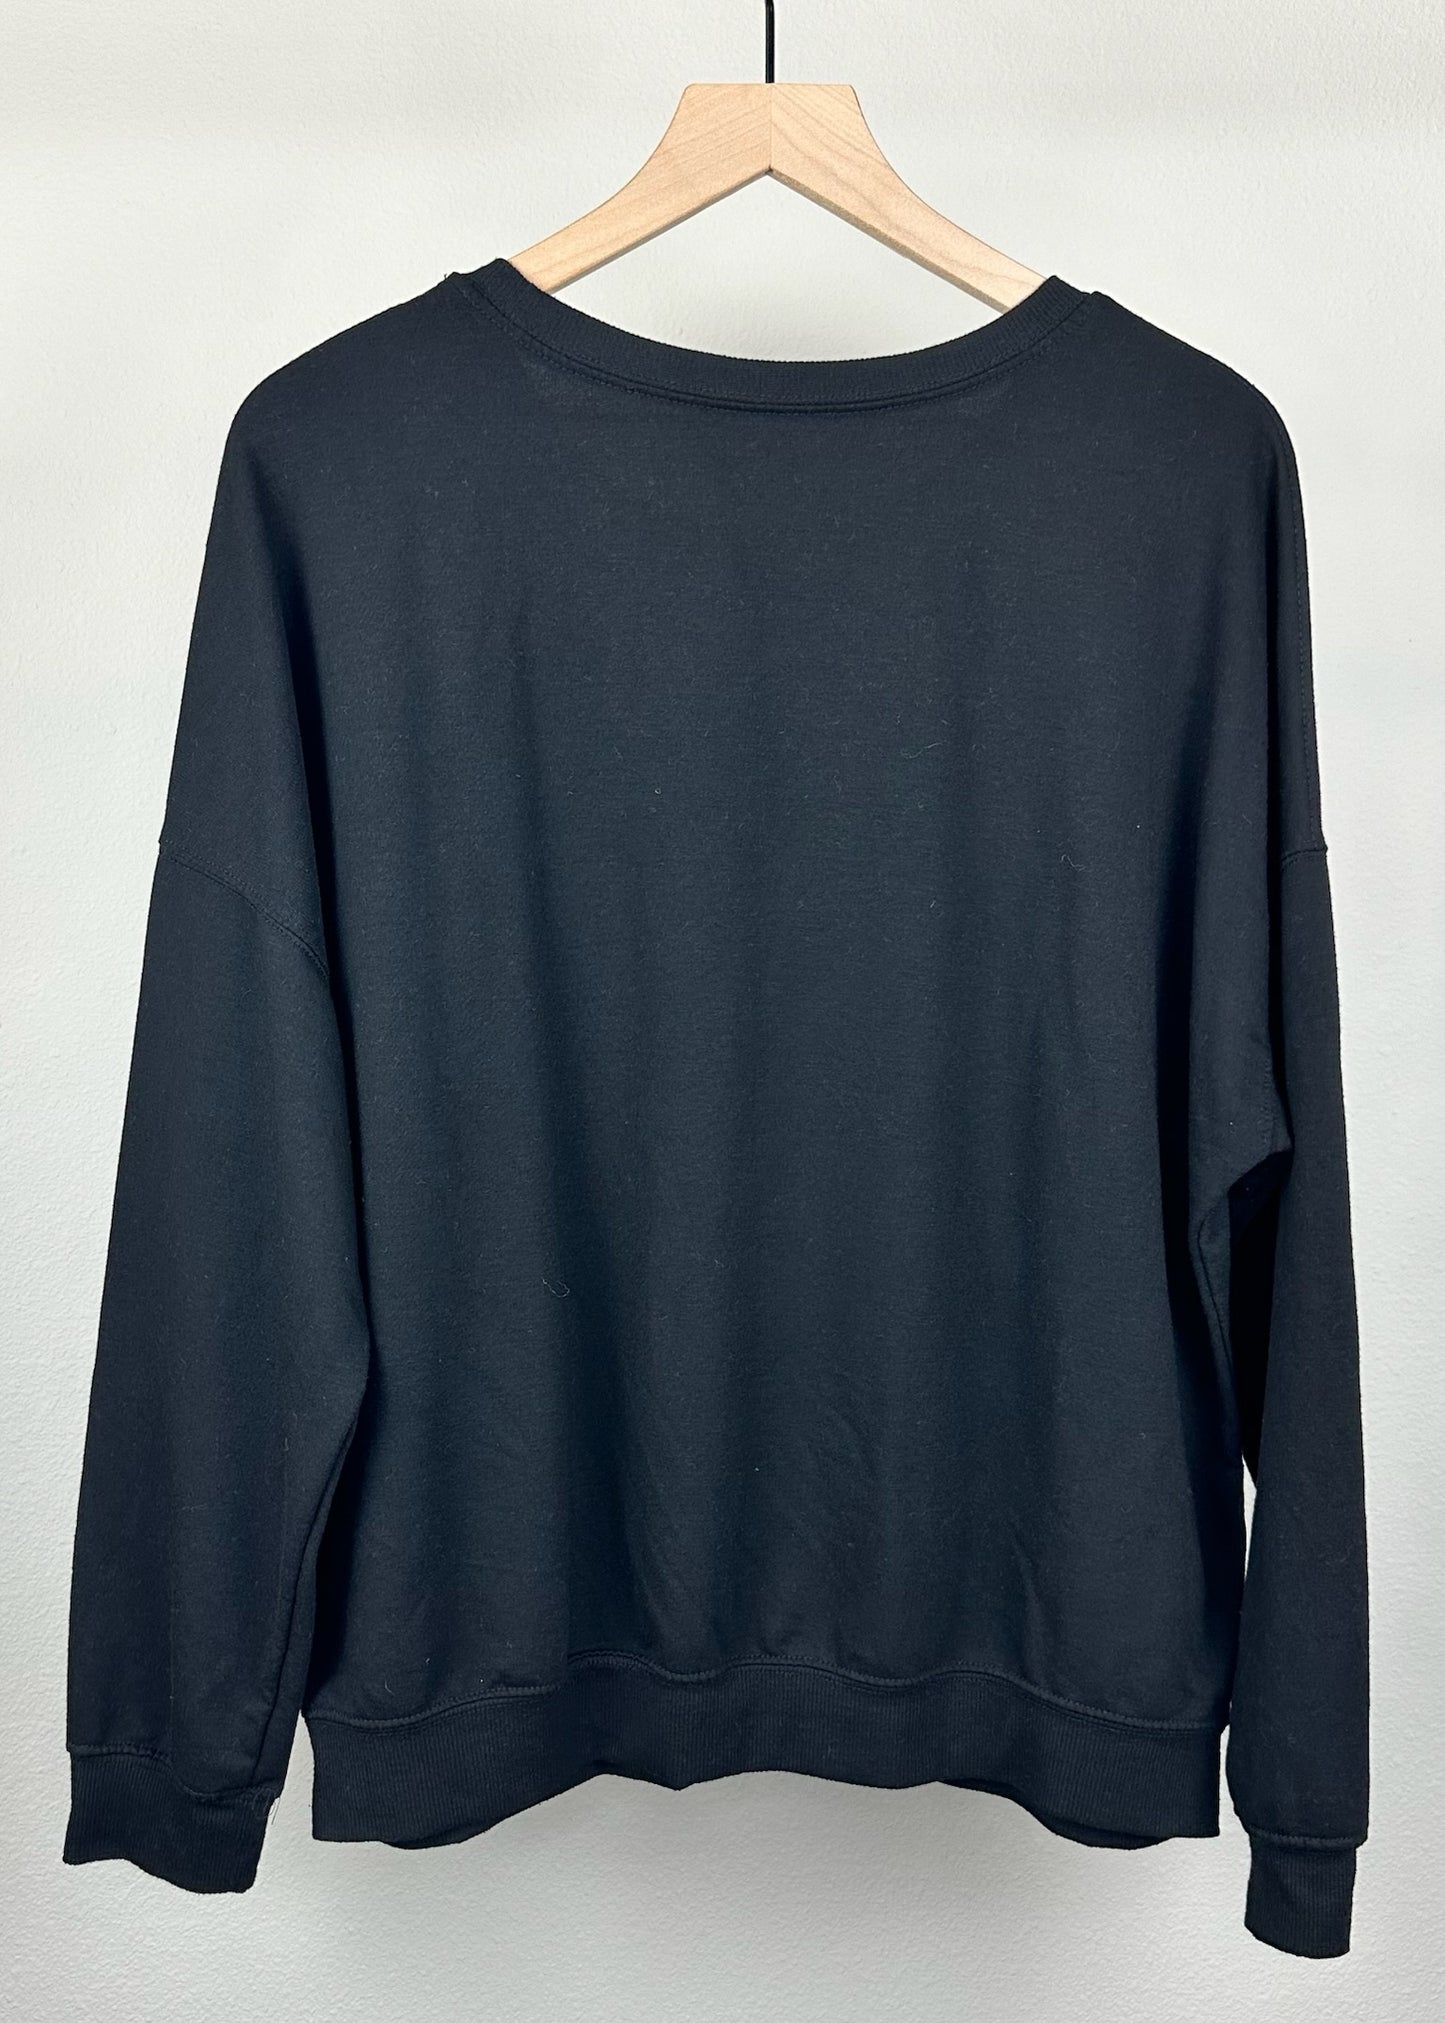 Every Shade Black Sweatshirt (only) by Zoe + Liv